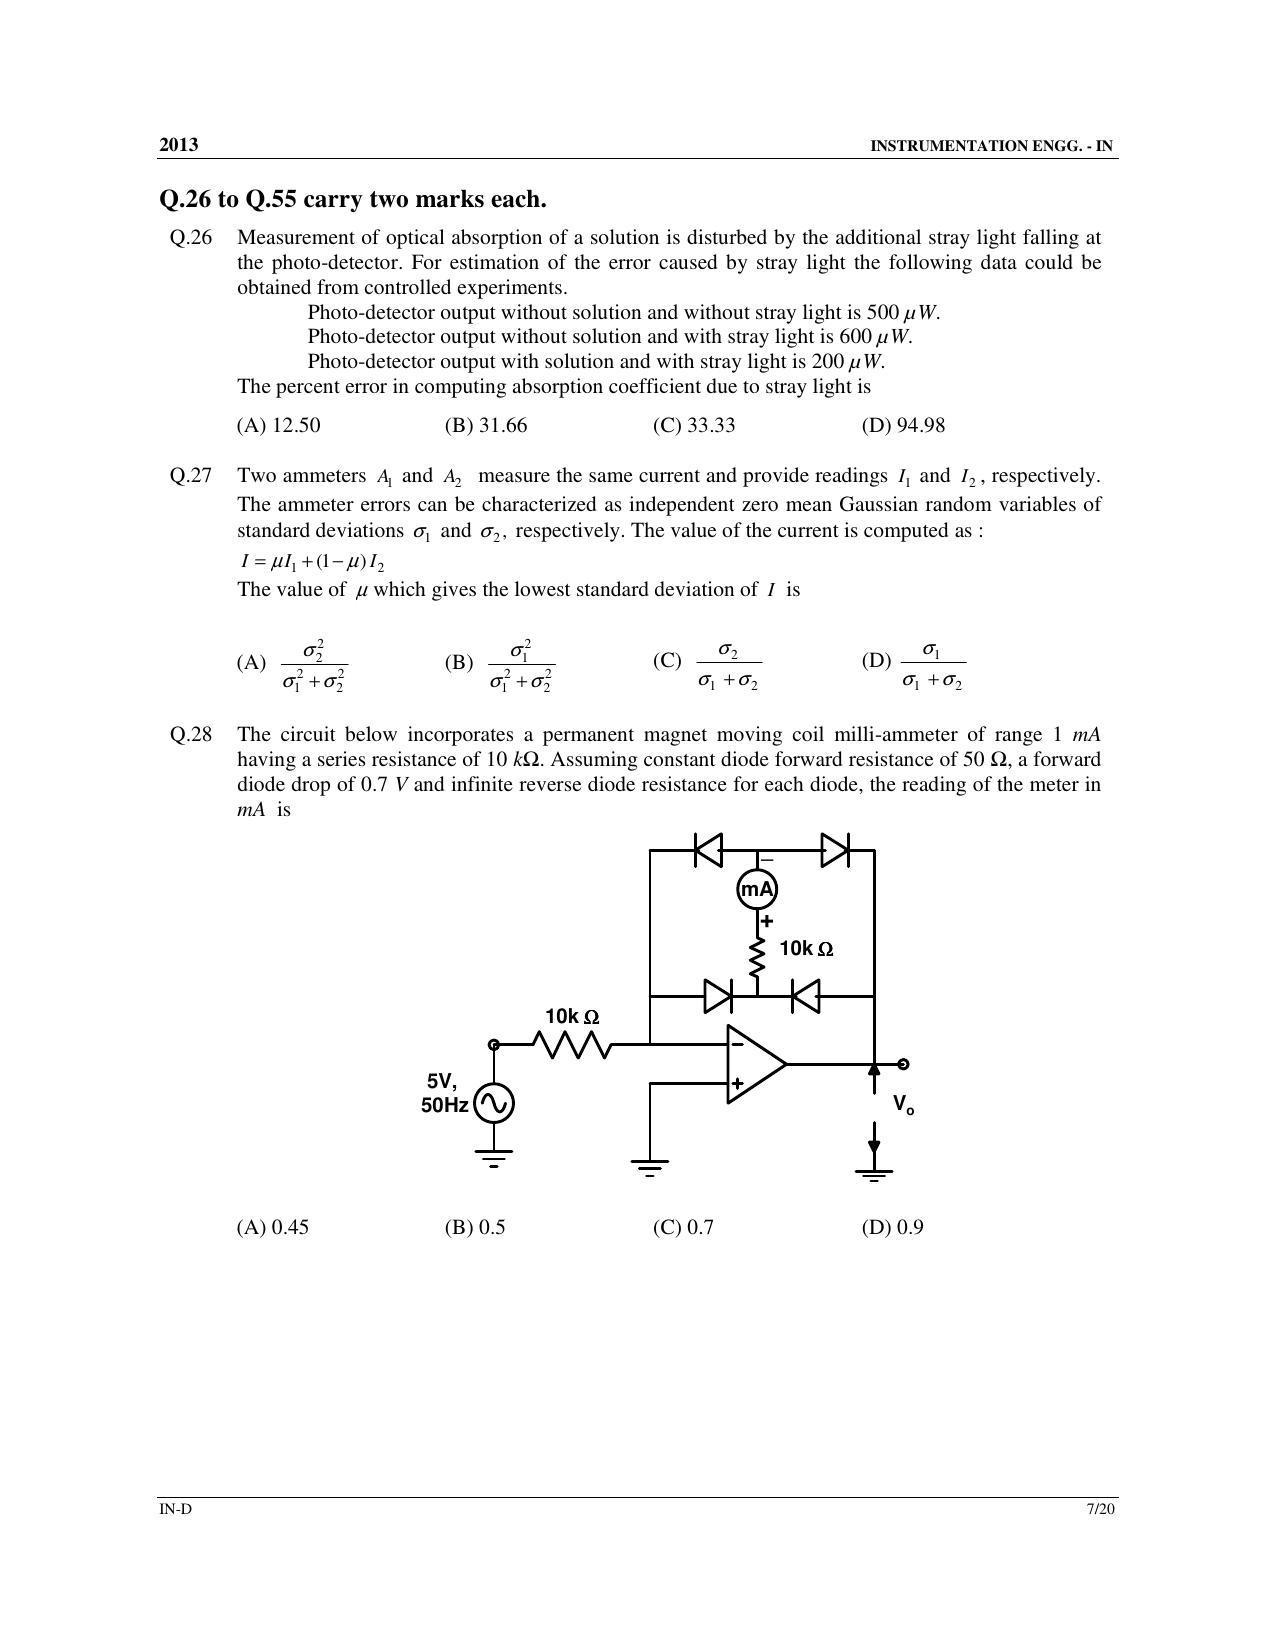 GATE 2013 Instrumentation Engineering (IN) Question Paper with Answer Key - Page 59